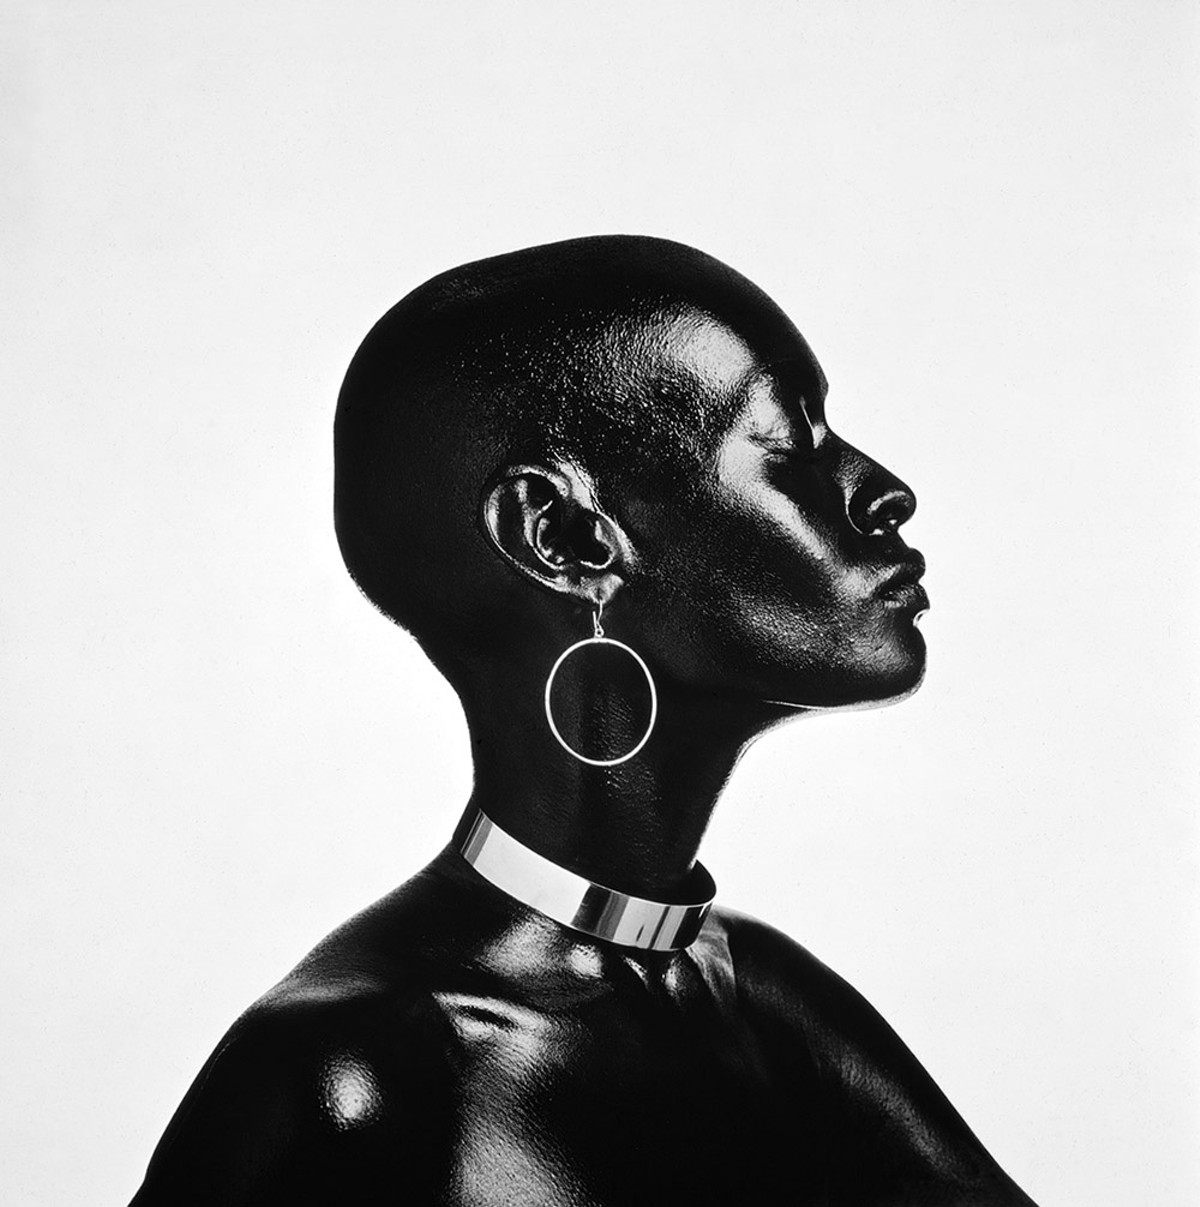 photo of Pat Evans by Anthony Barboza, from 'Posing Beauty'